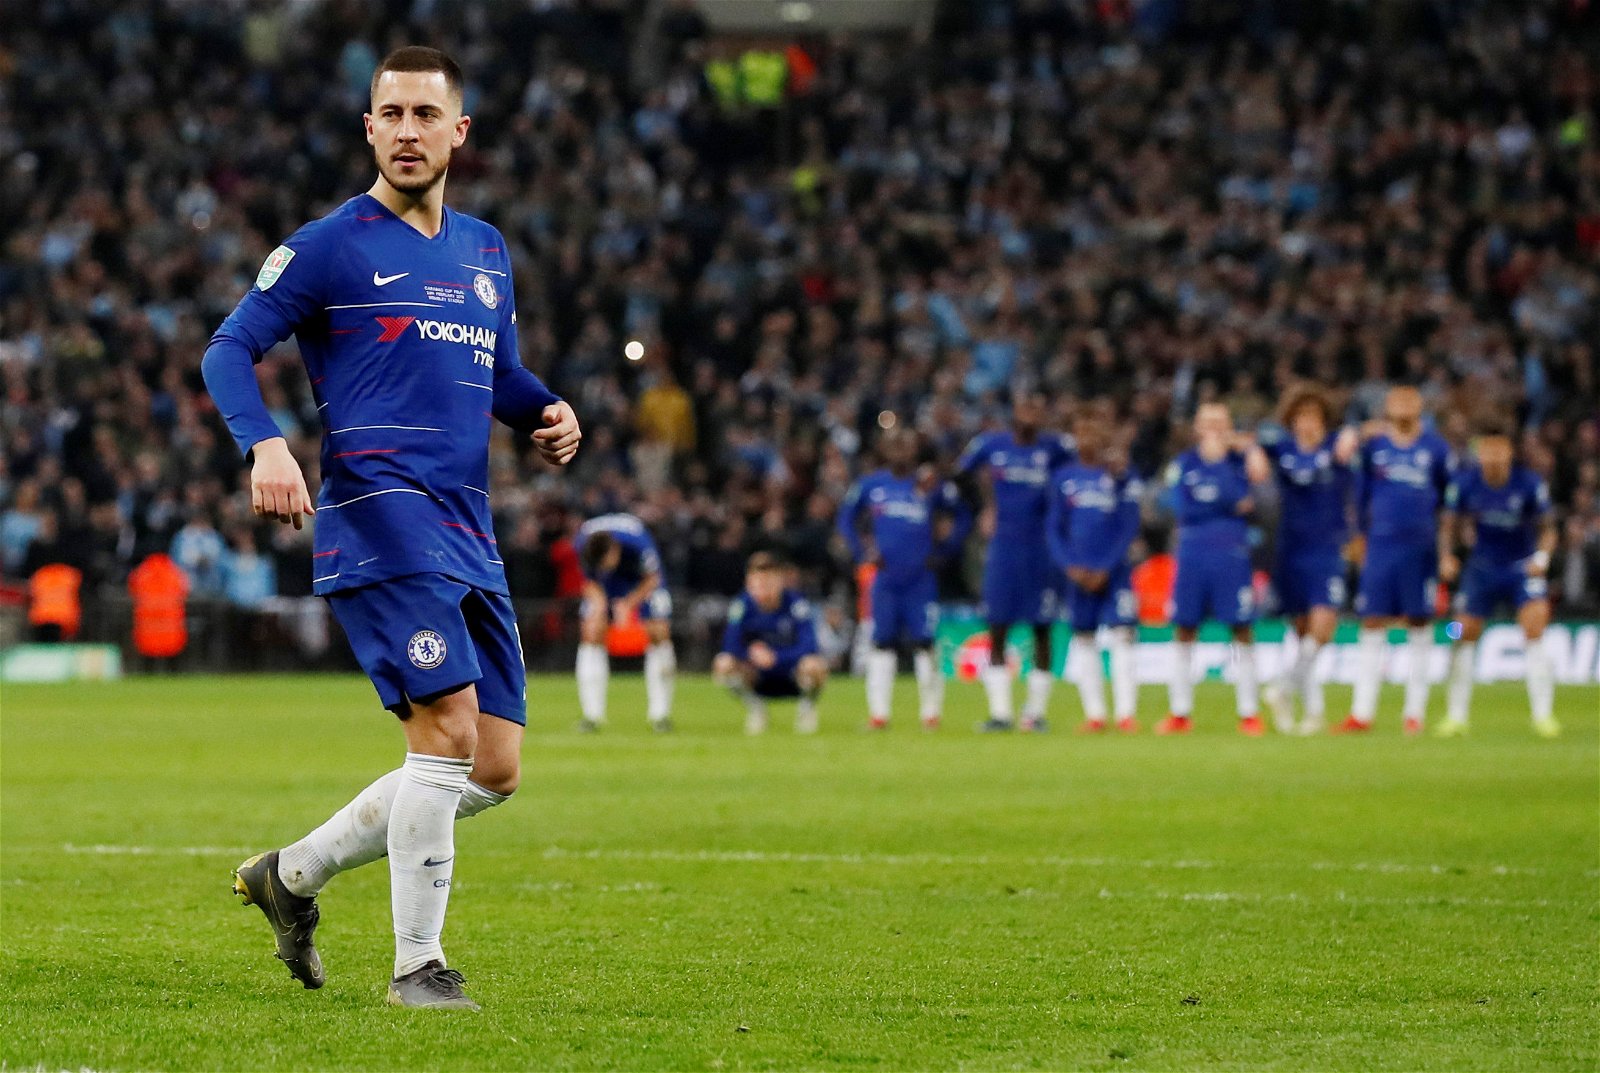 Former Chelsea manager says Hazard would excel at Real Madrid